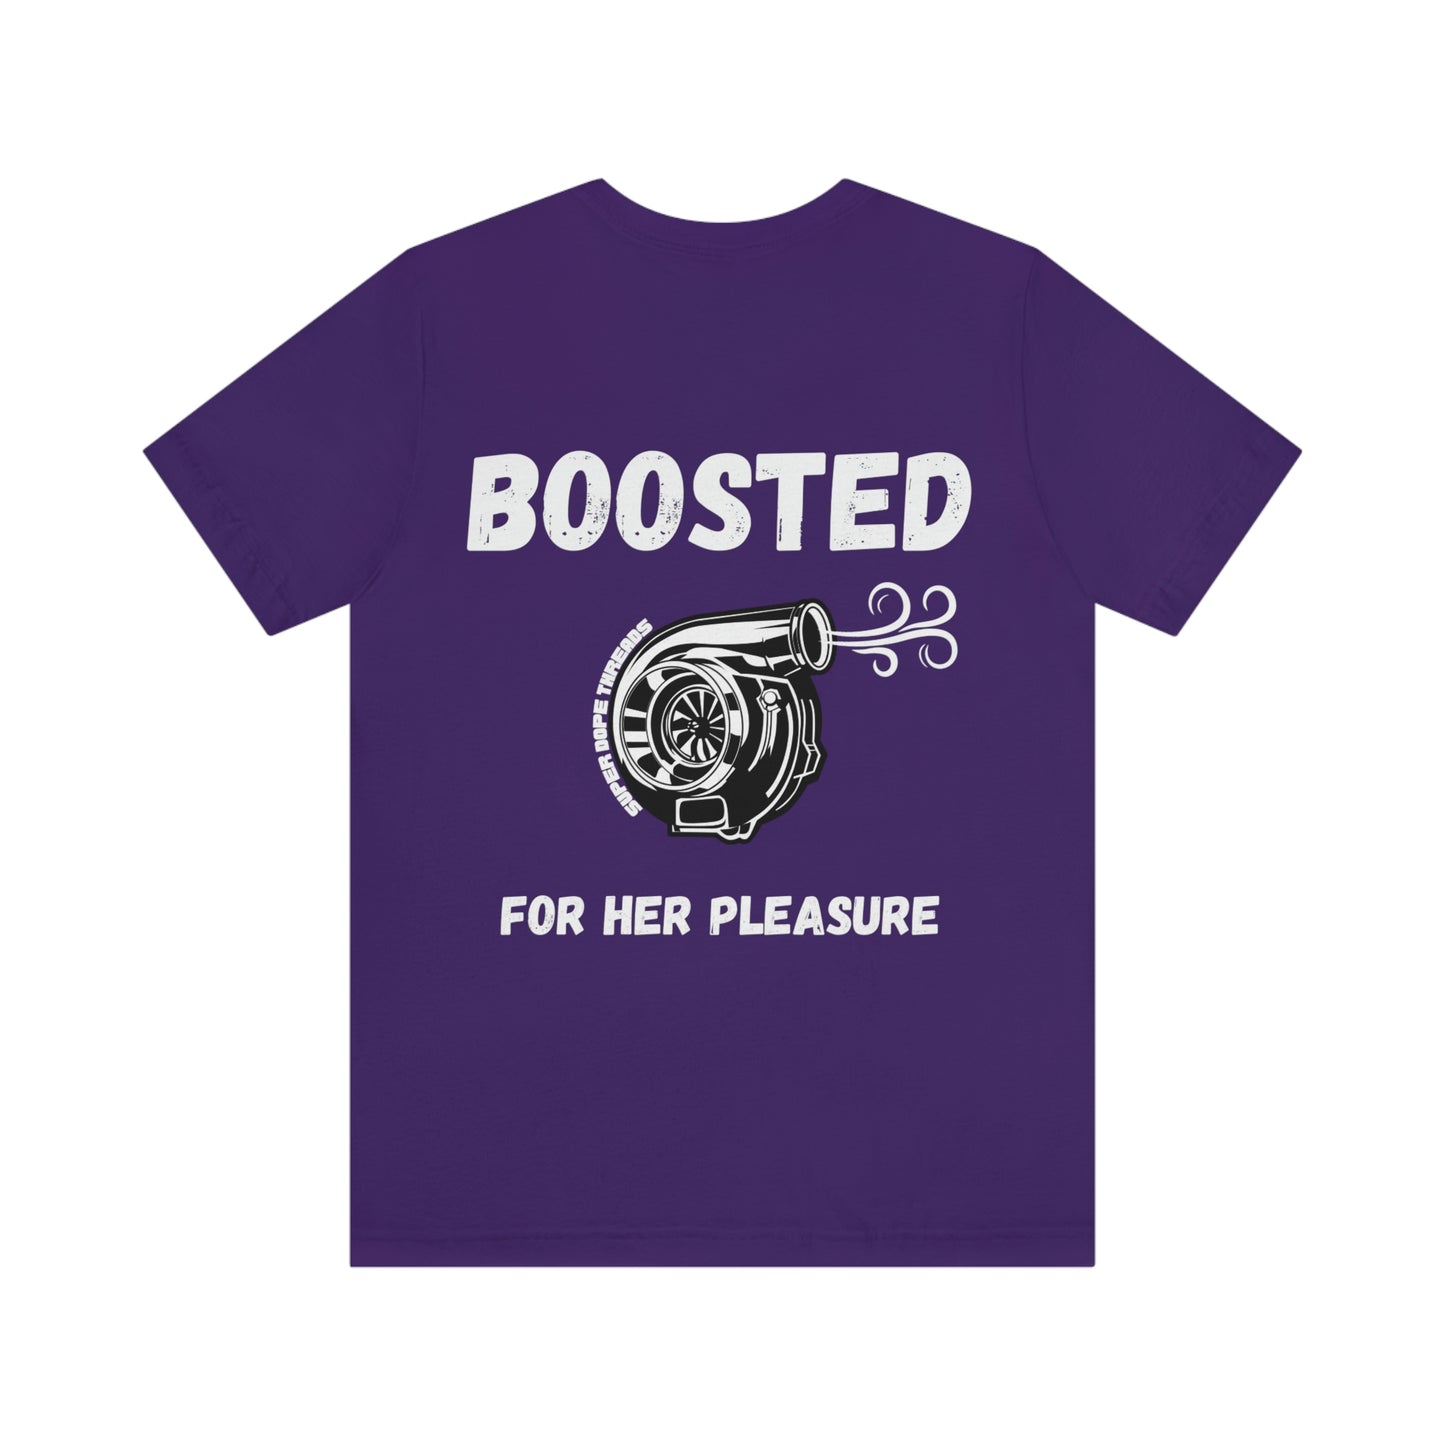 Super Dope Threads - Boosted